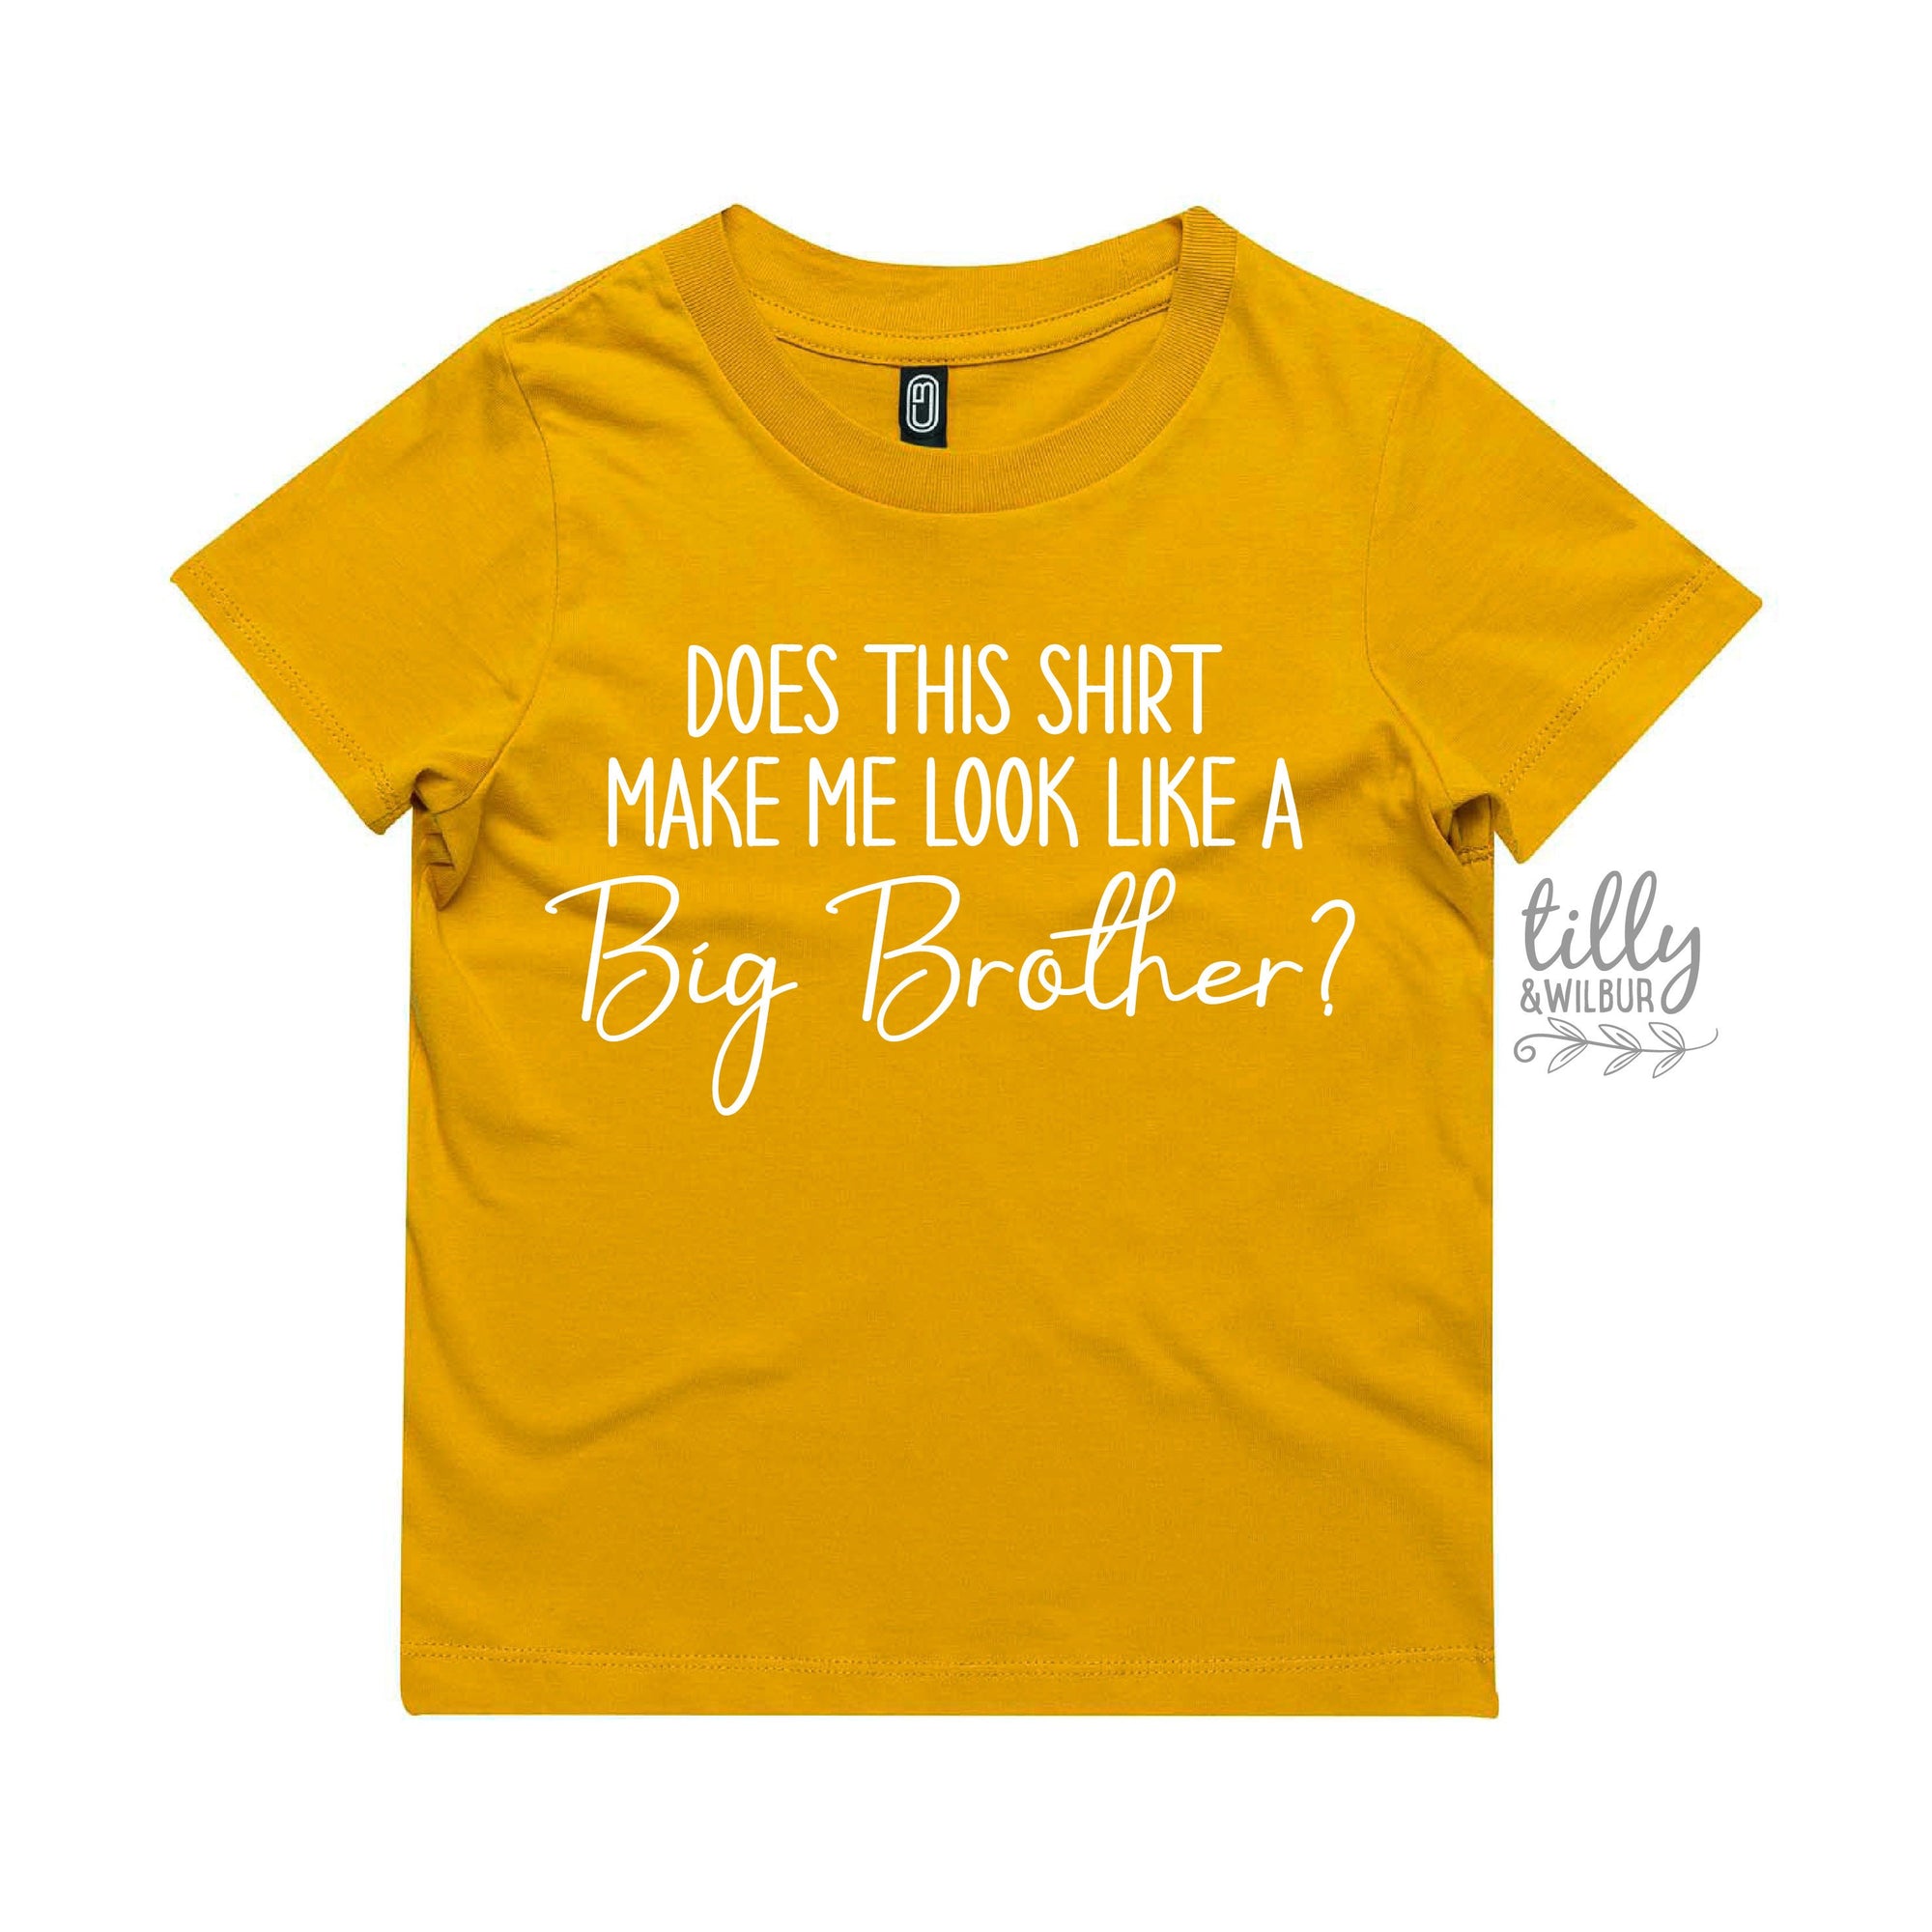 Does This Shirt Make Me Look Like A Big Brother T-Shirt, Pregnancy Announcement T-Shirt, Promoted To Big Brother T-Shirt, Big Brother Shirt